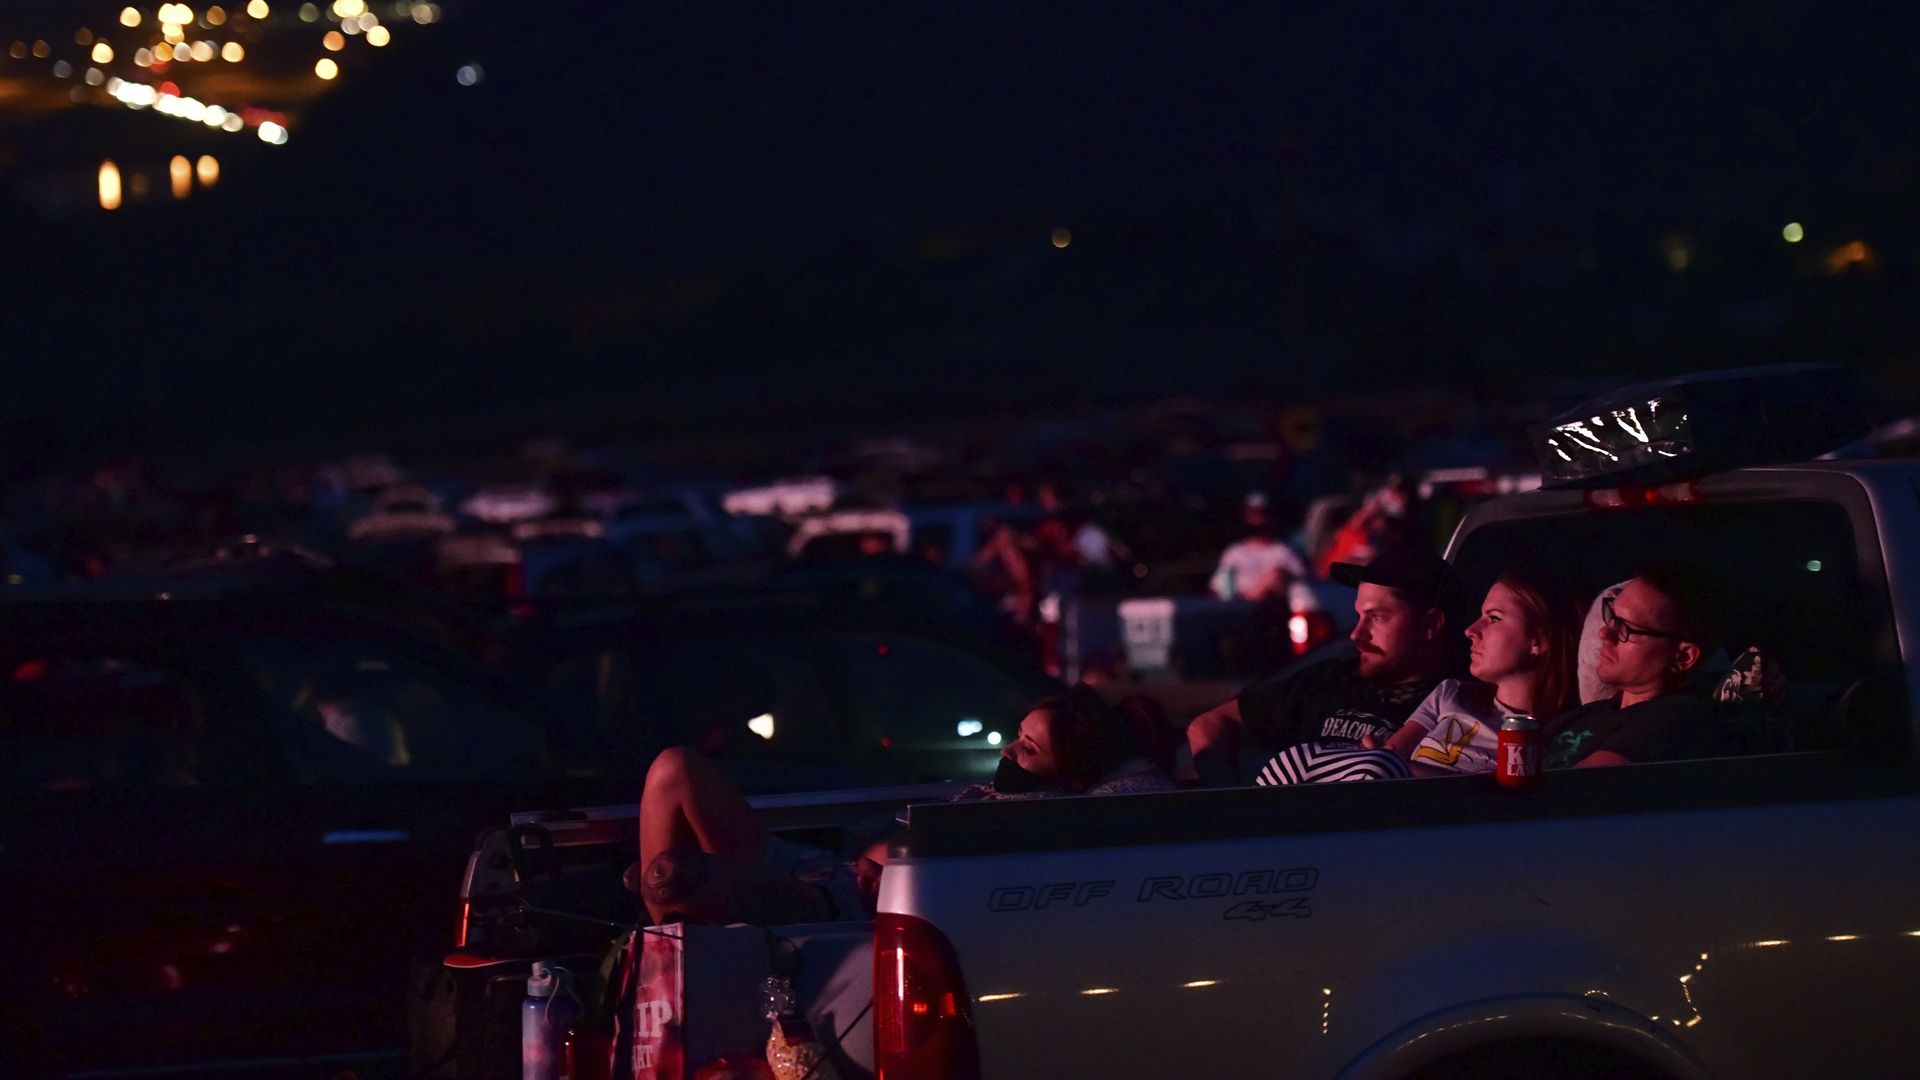 People attend a drive-in movie theater screening at the Red Rocks Amphitheatre. Photo: Mark Makela/Getty Images